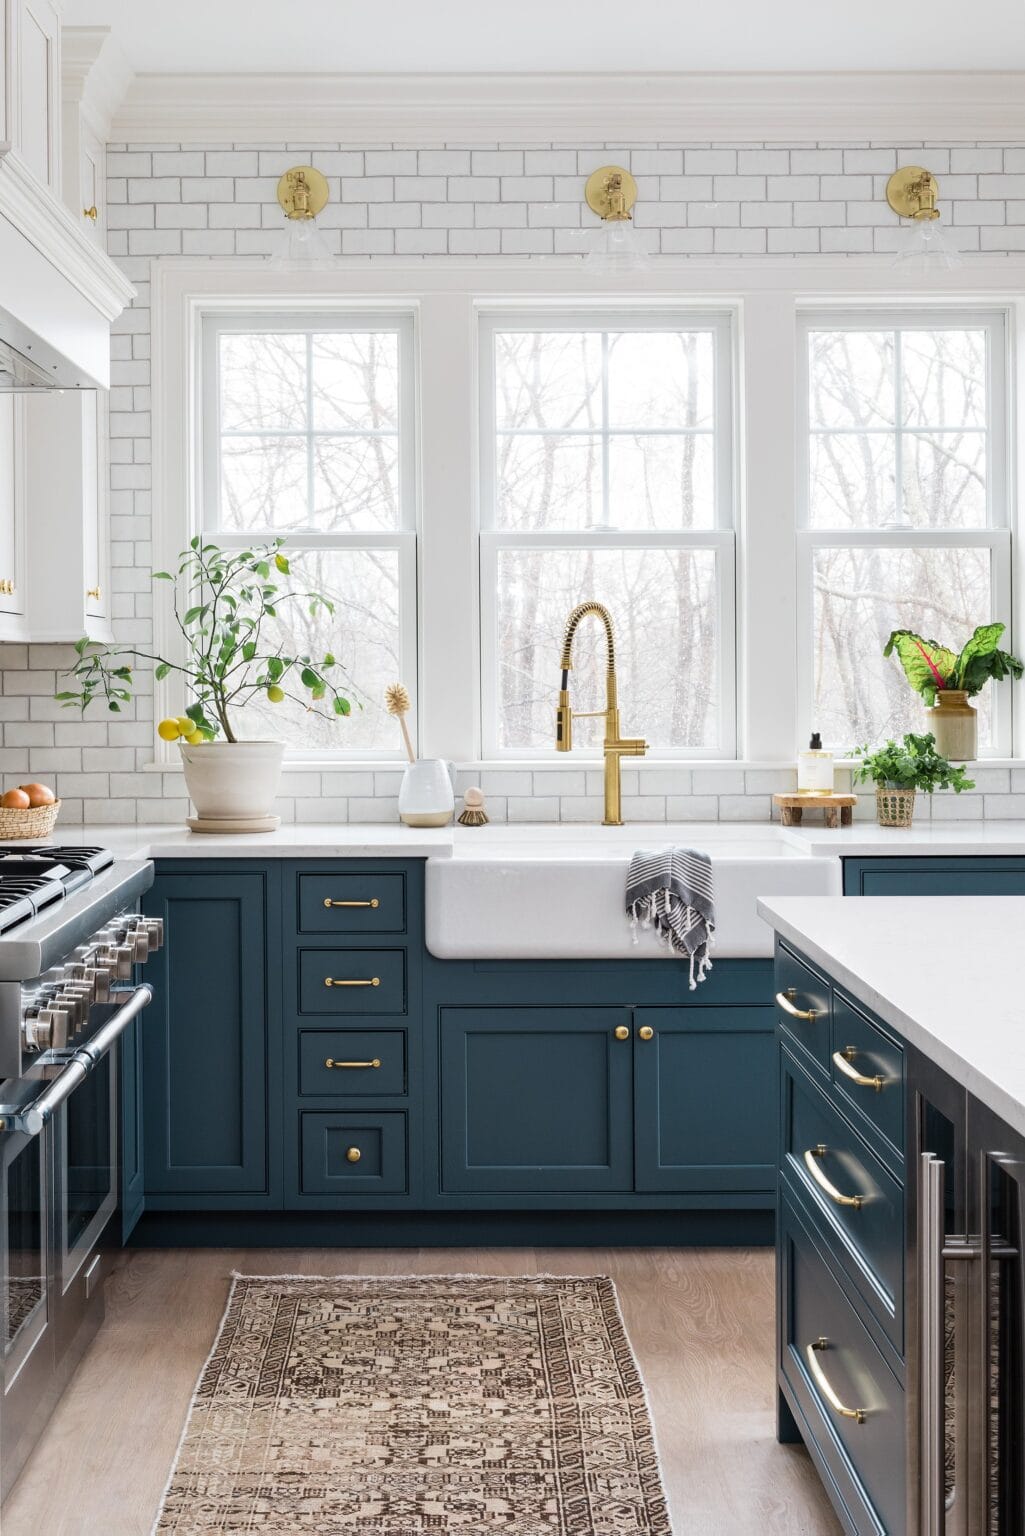 Trendy Kitchen Cabinet Colors - A Blissful Nest